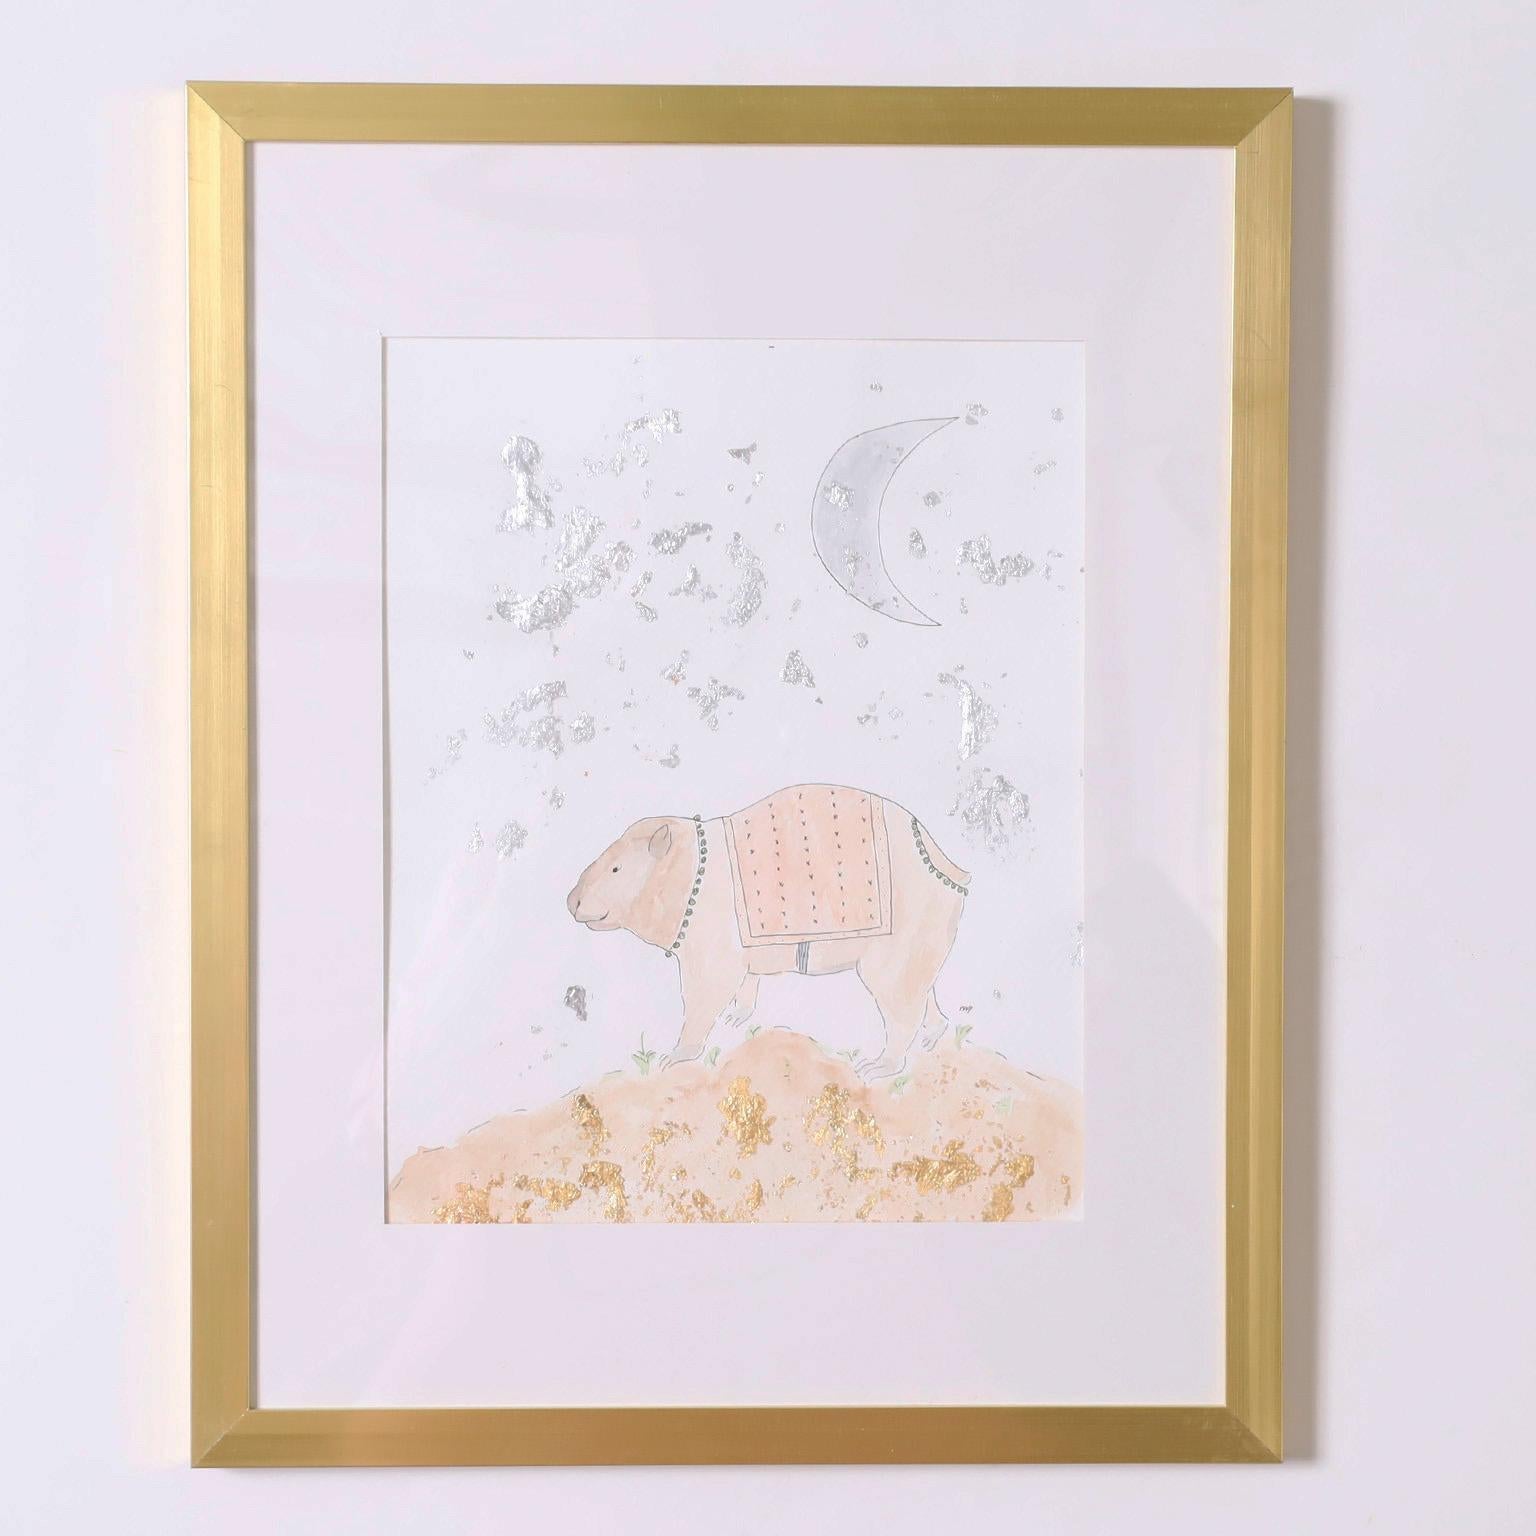 Set of Four Original Mixed Media Drawings of Animals - Art by Unknown